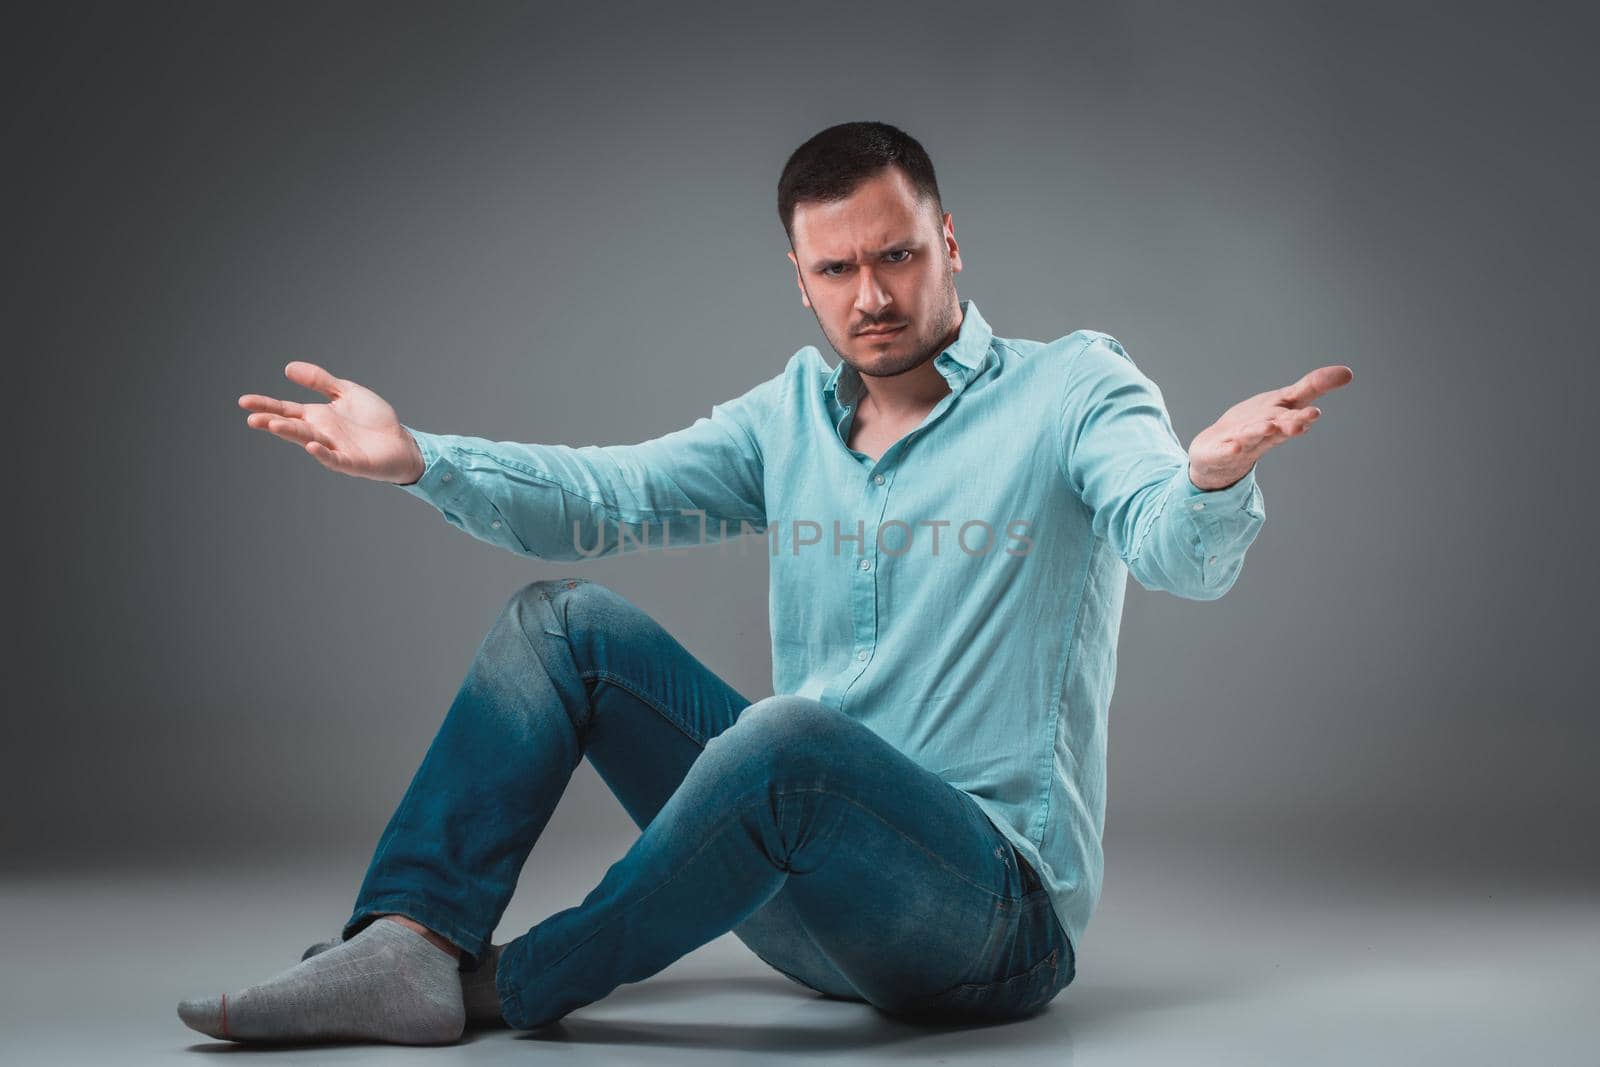 Handsome young man sitting on a floor with raised hands gesturing on gray background. A man in jeans and a blue shirt